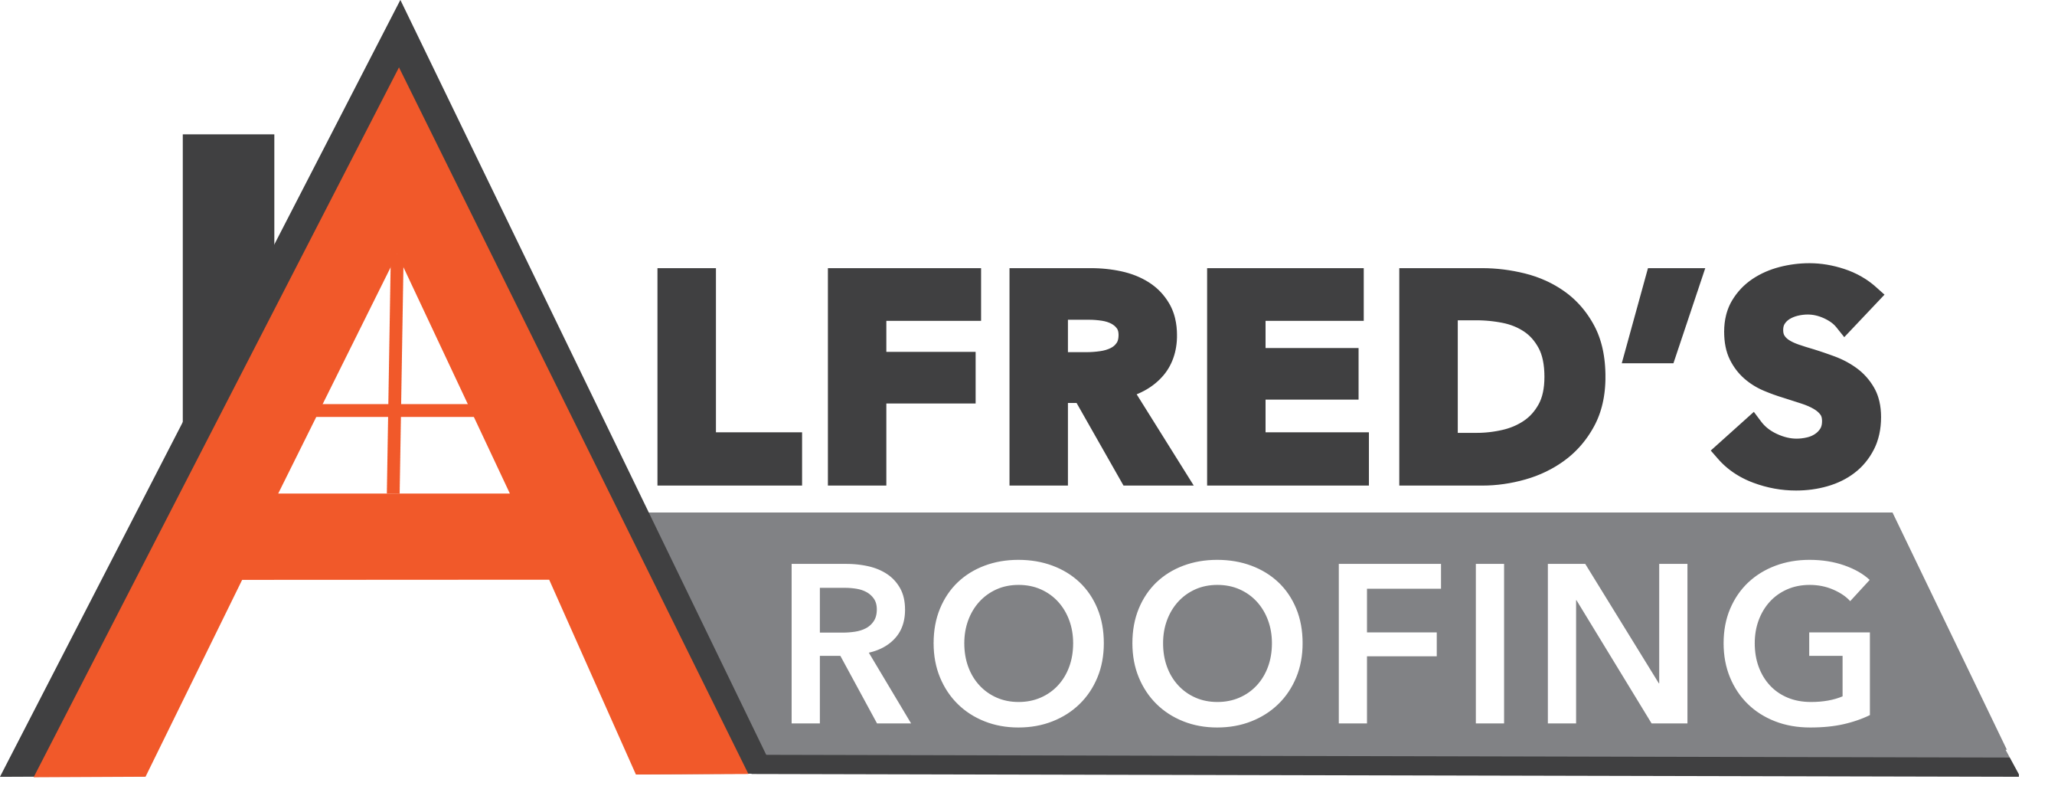 F_Alfreds_Roofing_Transluscent-2048x786-1.png